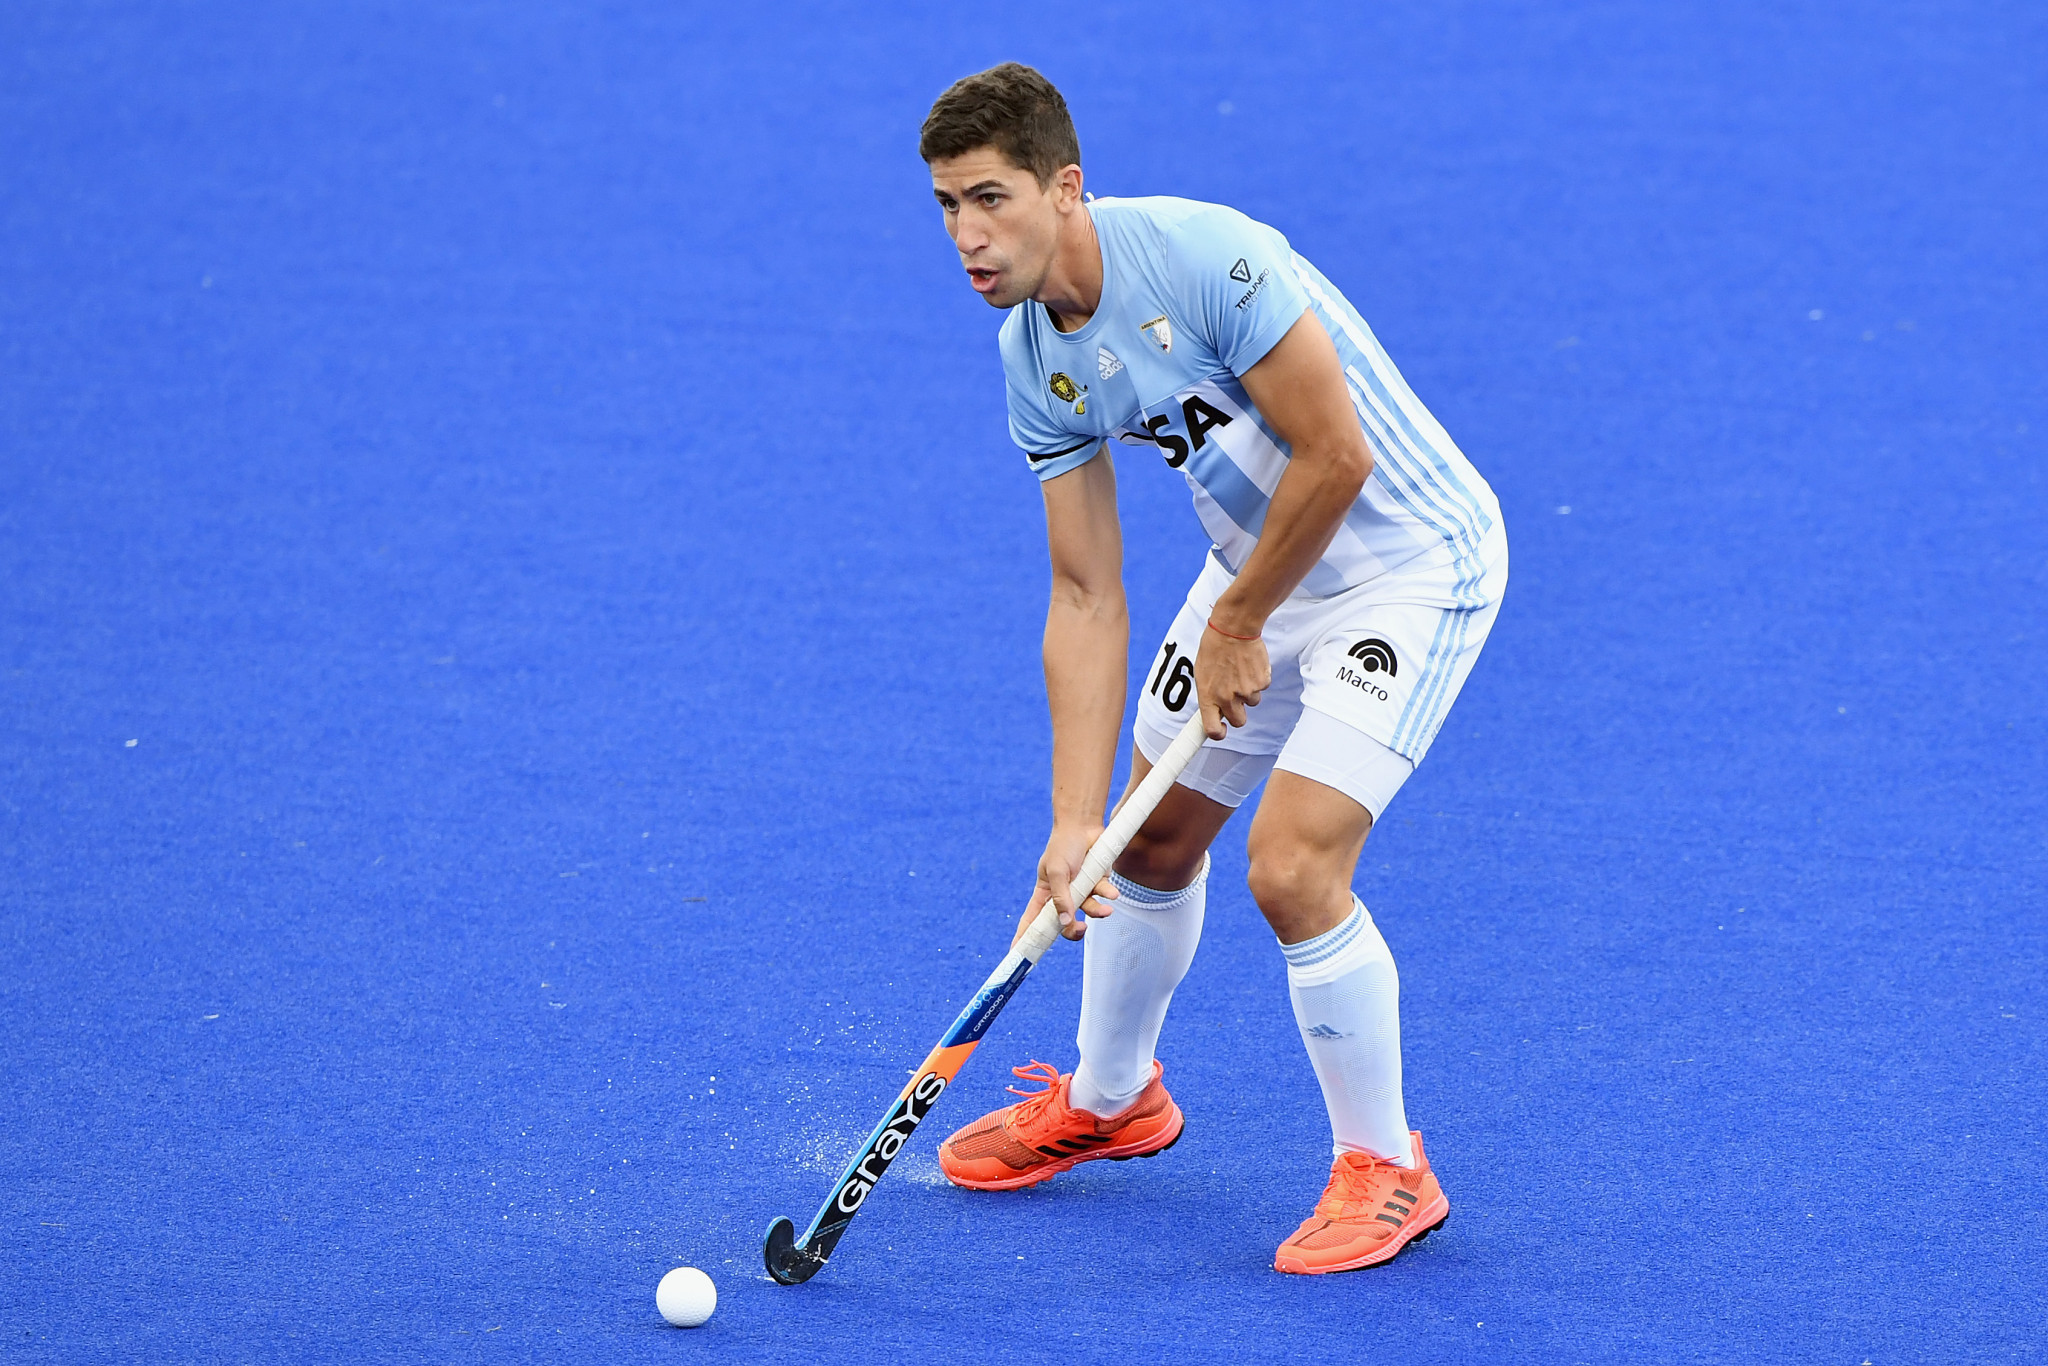 Argentina's men's team will play Germany and India in the Hockey Pro League next month ©Getty Images